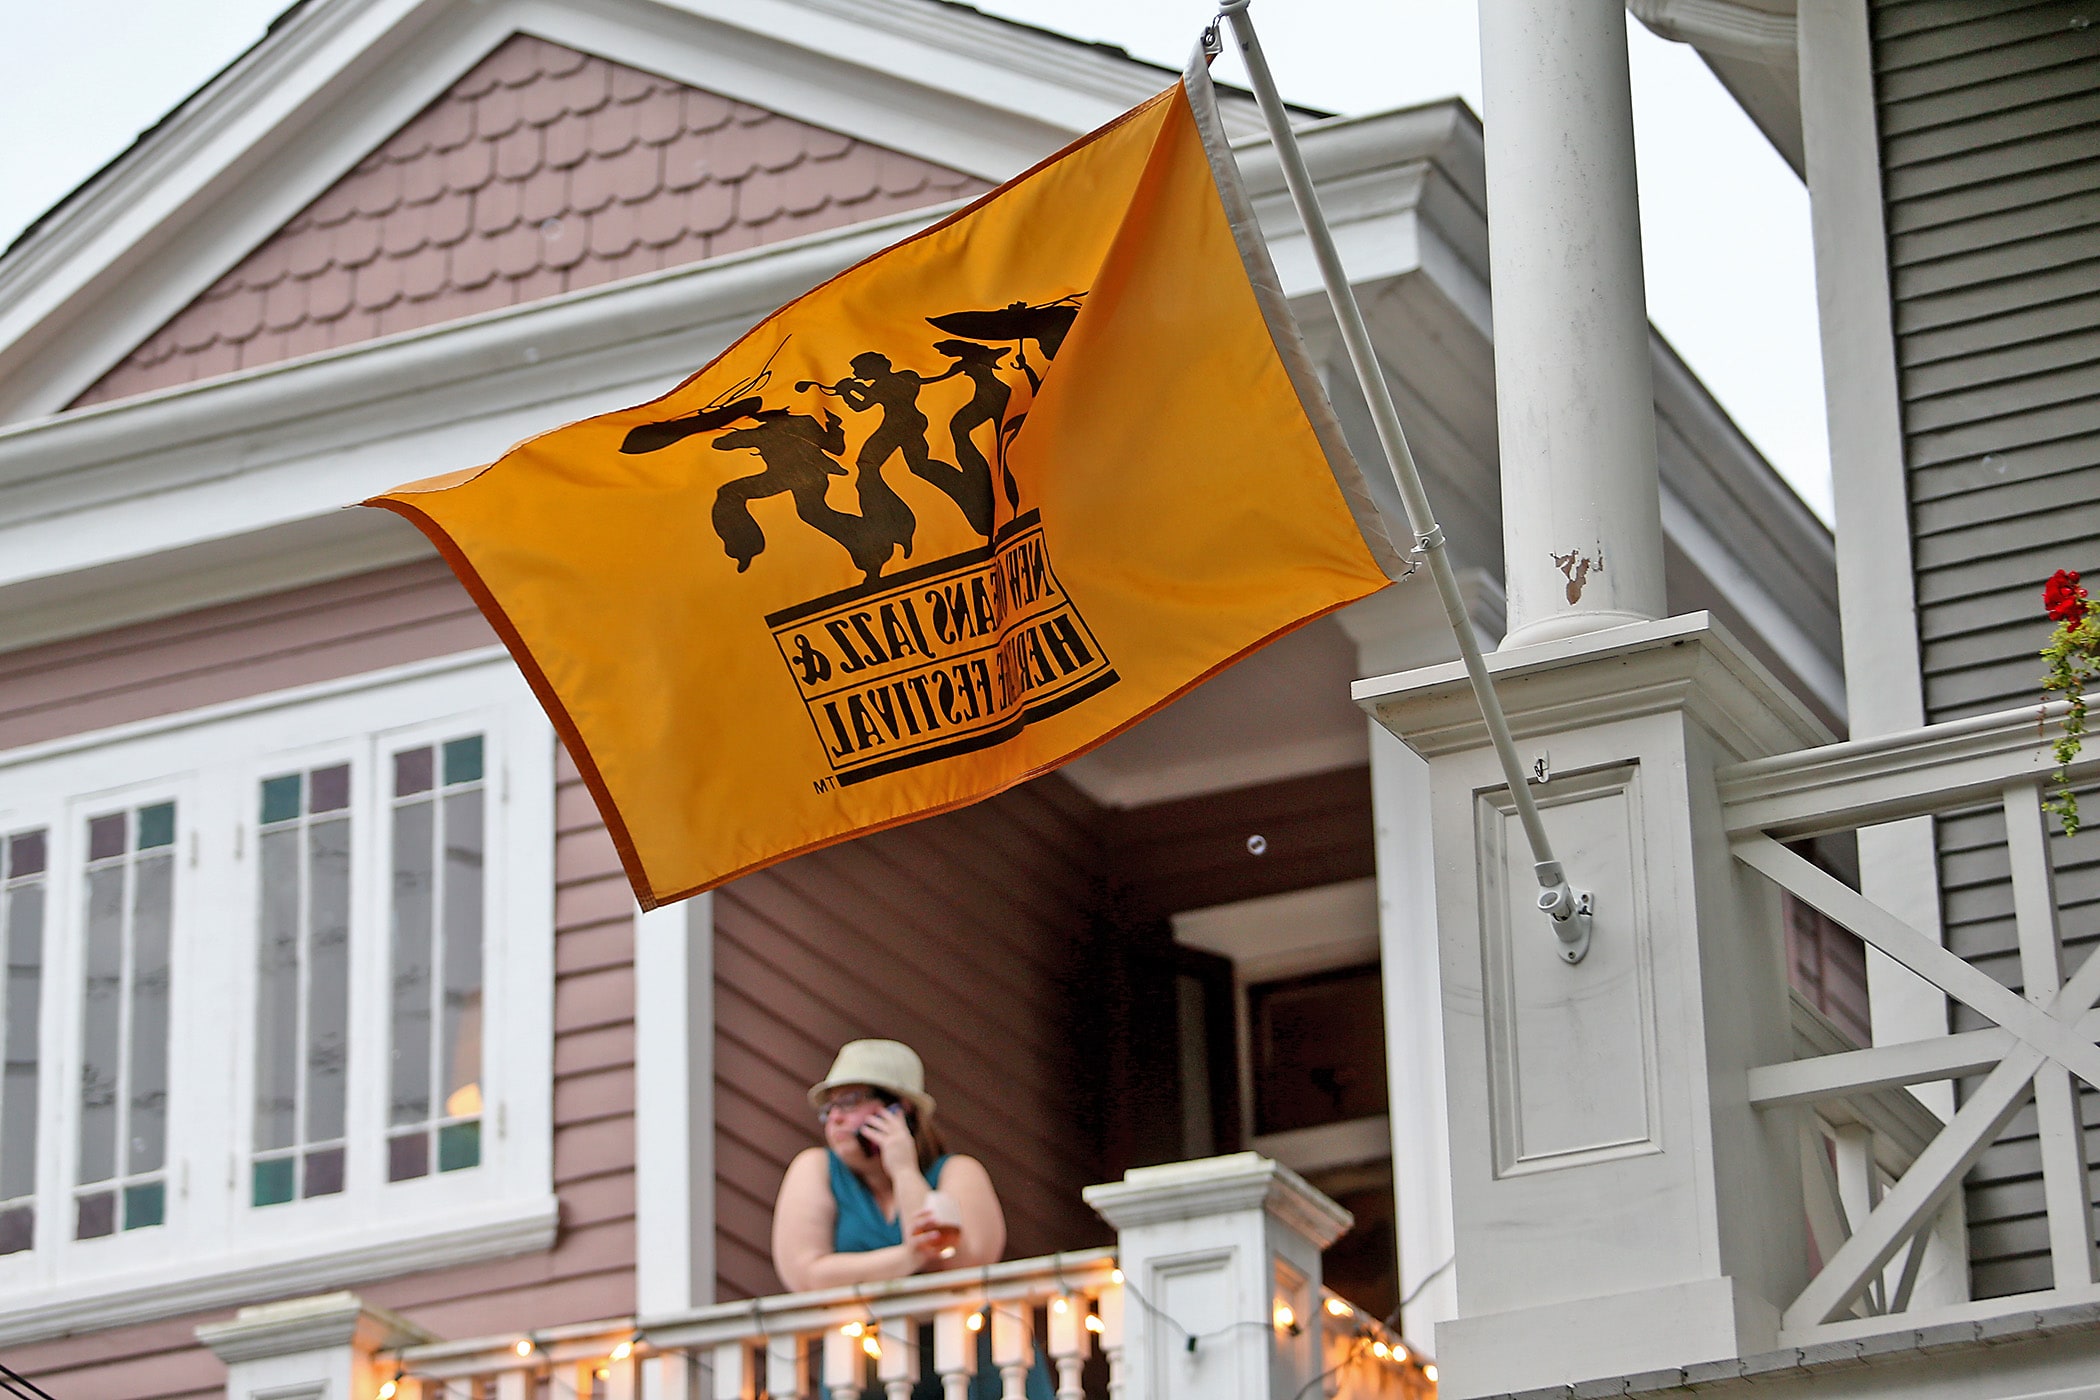 Neighbors take to their balconies and porches on Esplanade Avenue after the New Orleans Jazz &amp; Heritage Festival was cancelled by the Covid-19 pandemic. Photographed on Saturday, April 25, 2020. (Photo by Michael DeMocker)